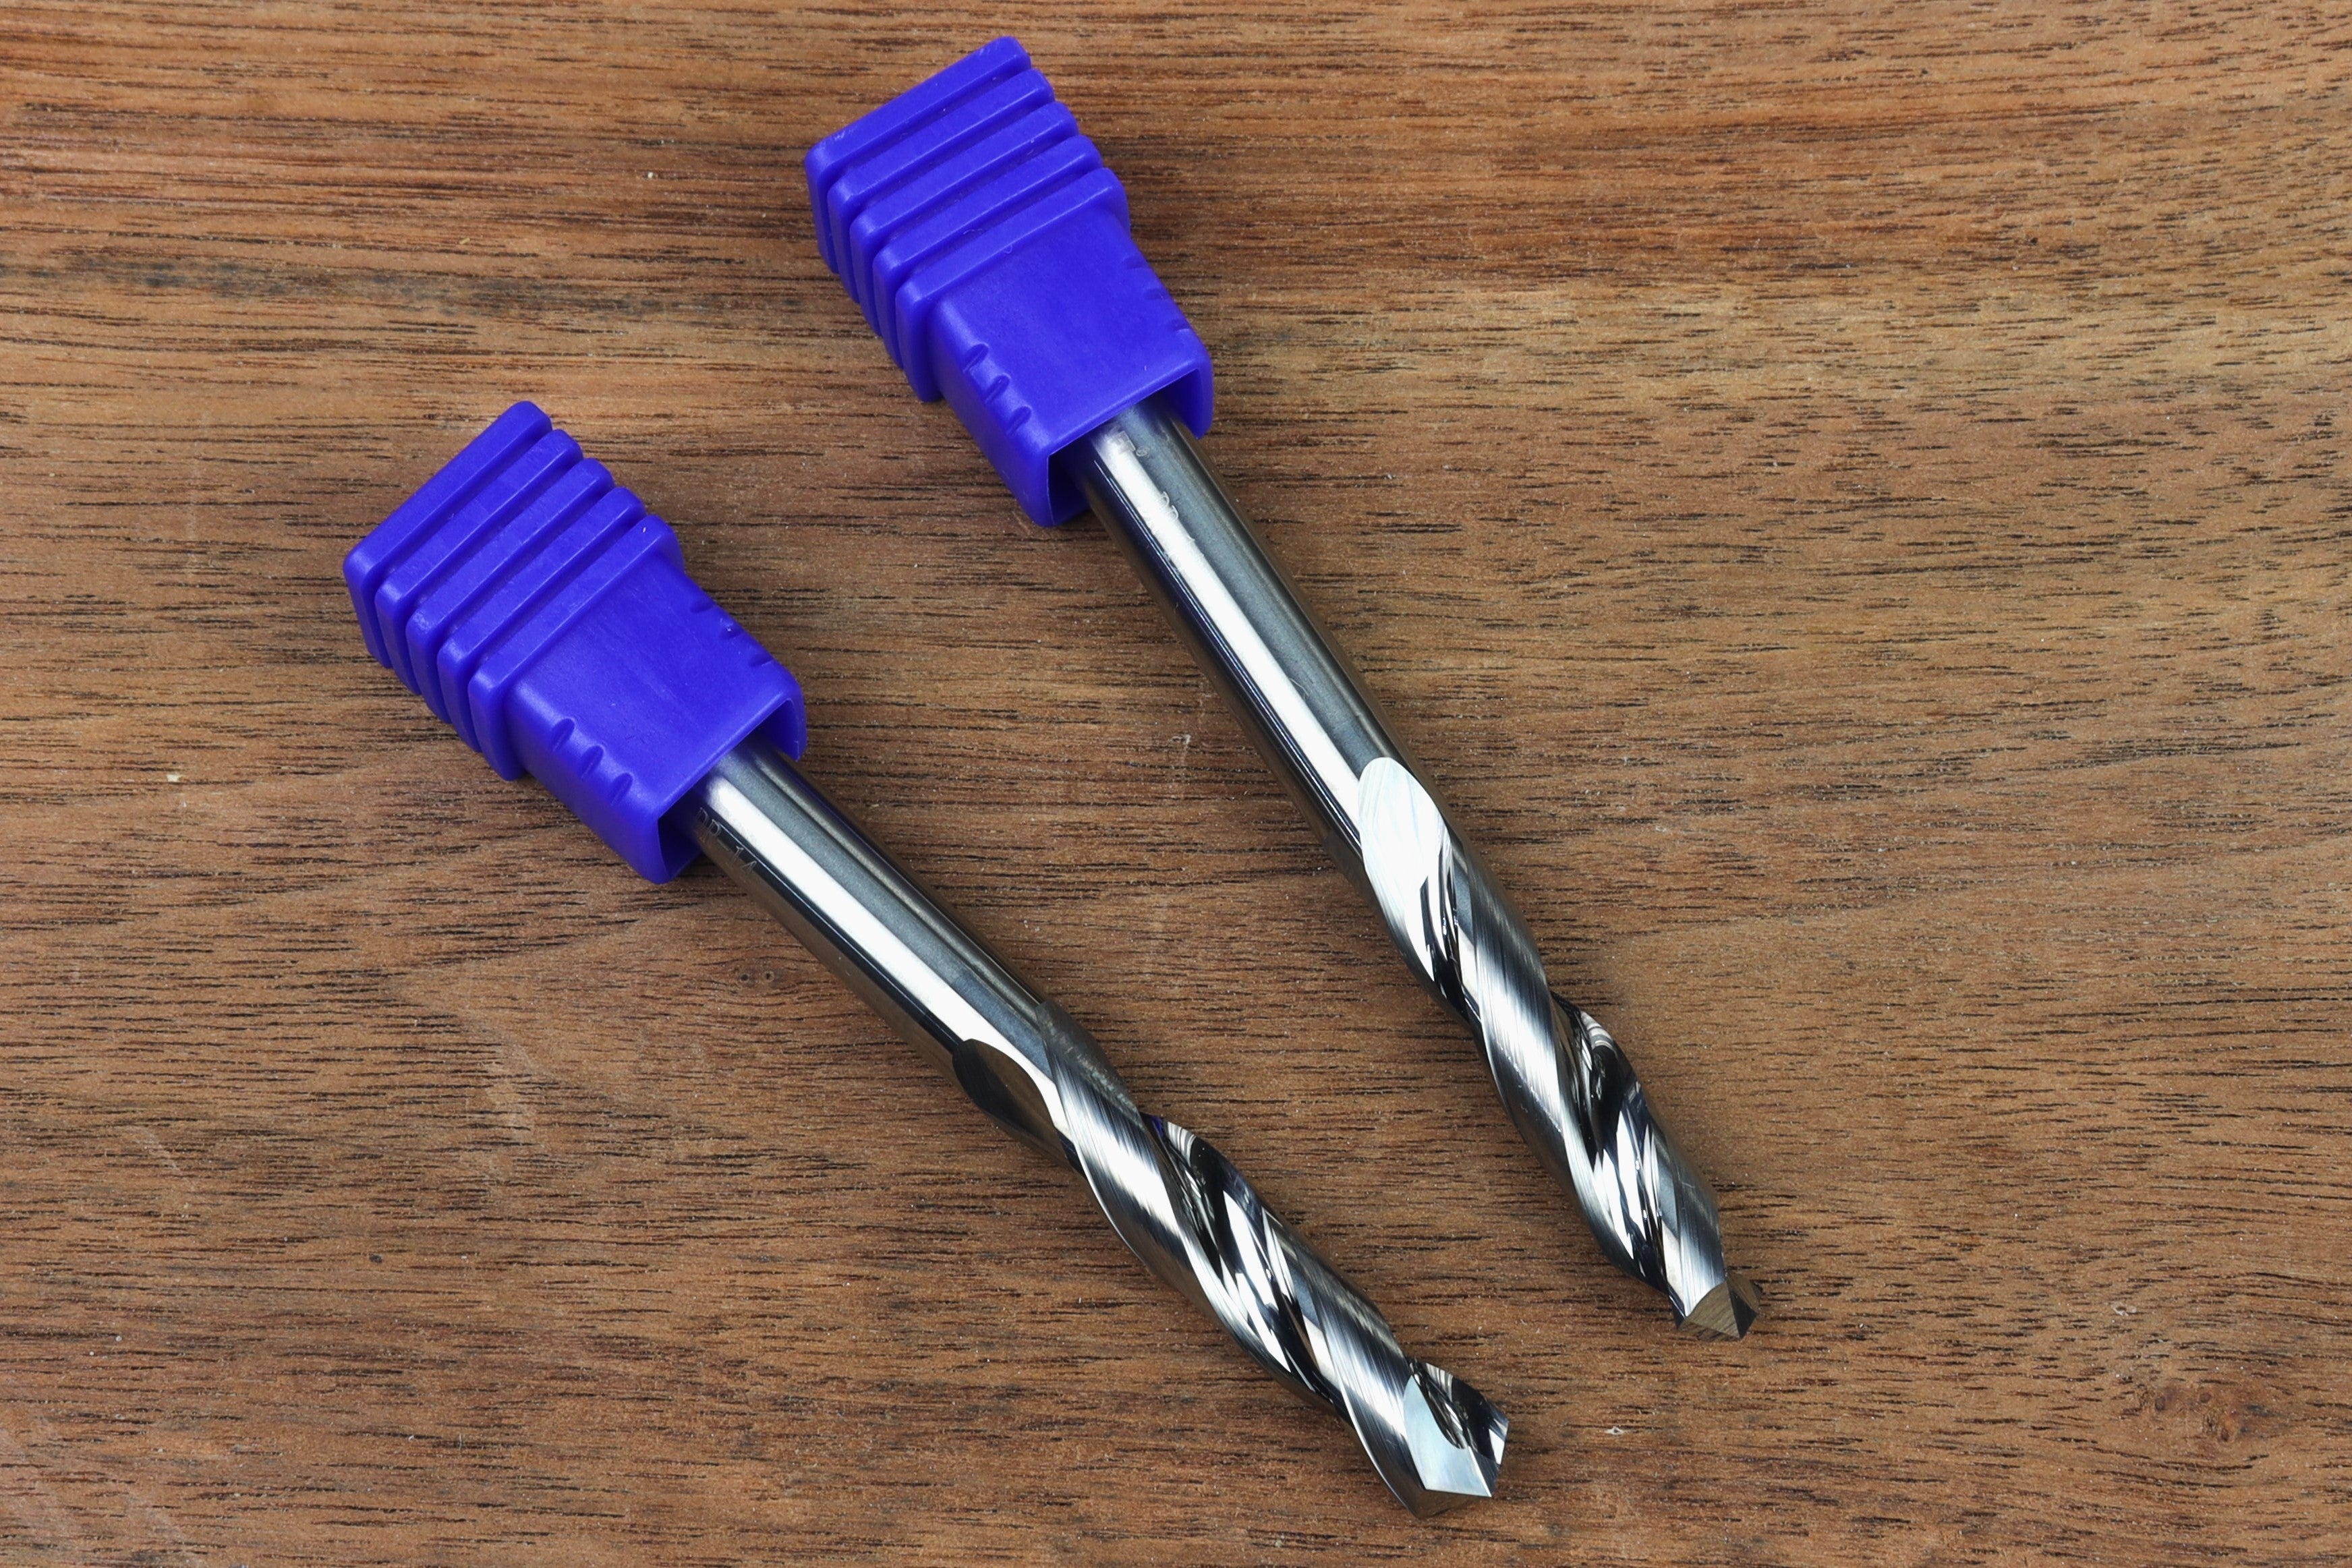 Set of 2 Extreme-Performance 1/4" Drill Bits for CNC Routers, 1/4 Shank